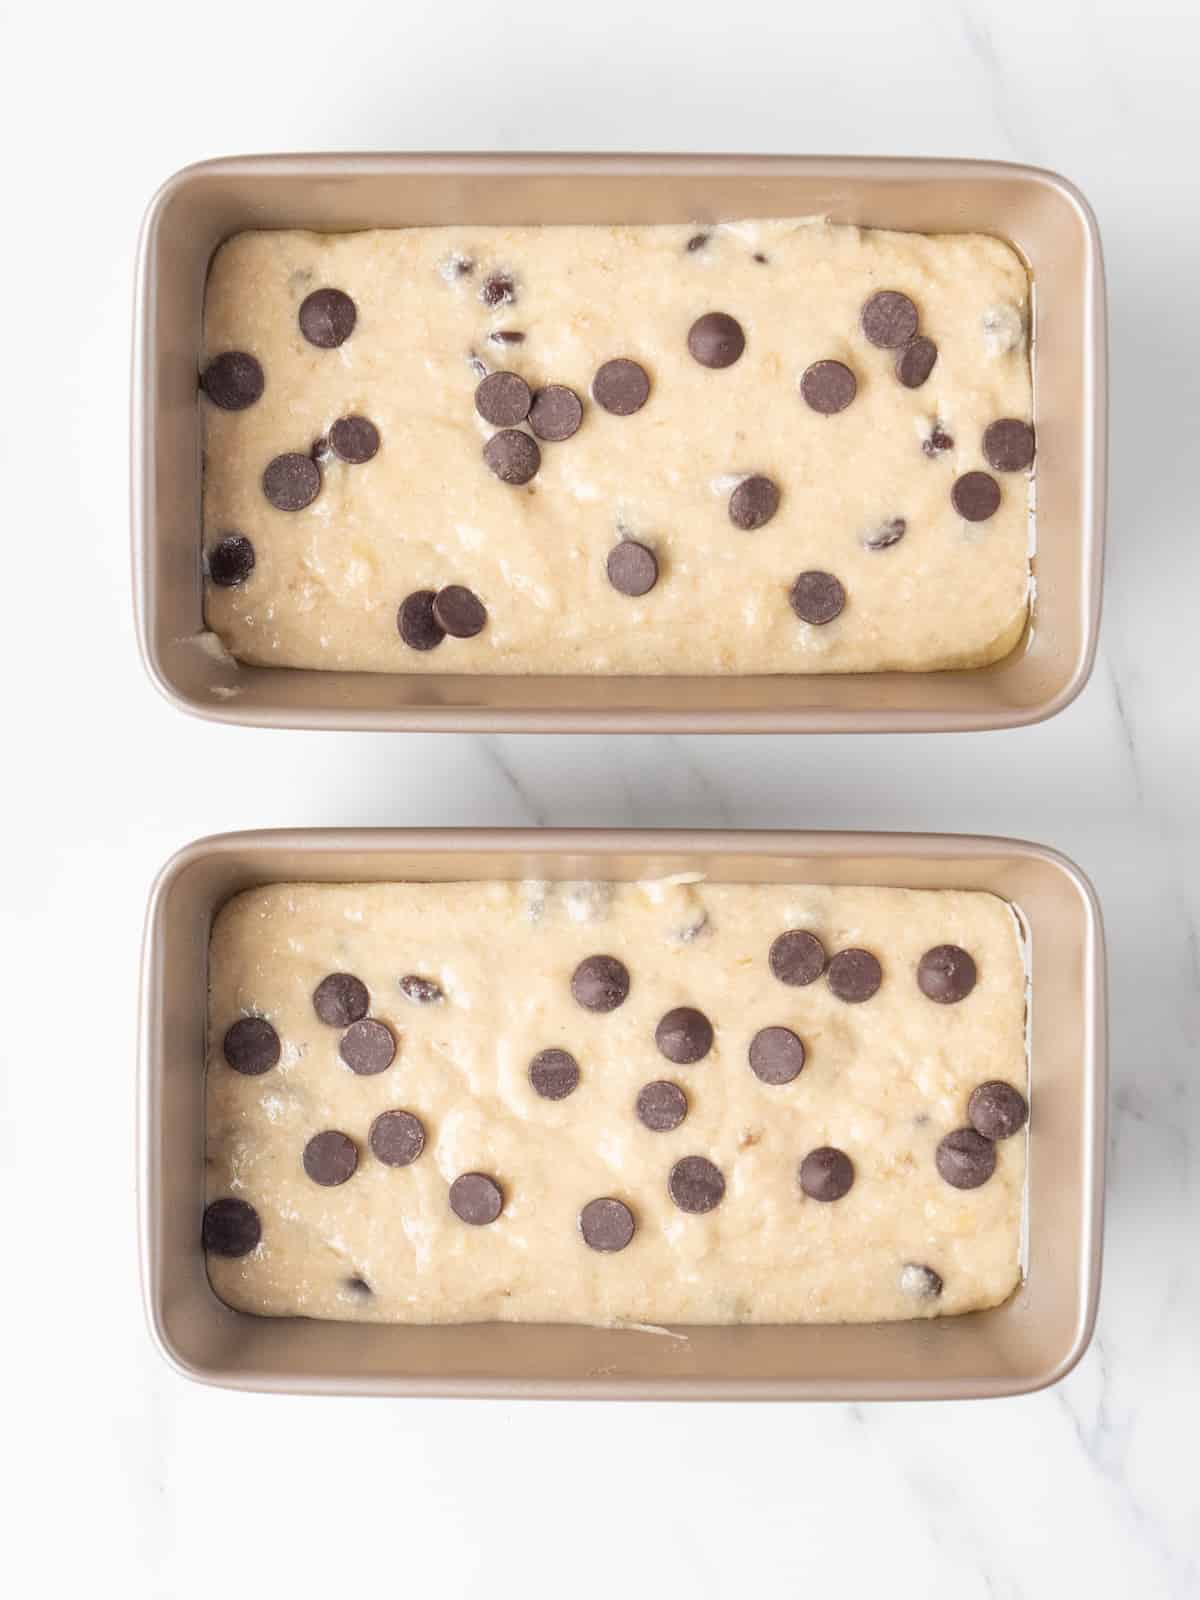 Two 9x5 loaf pans with banana bread batter with chocolate chips on the top, ready to be transferred into the oven.